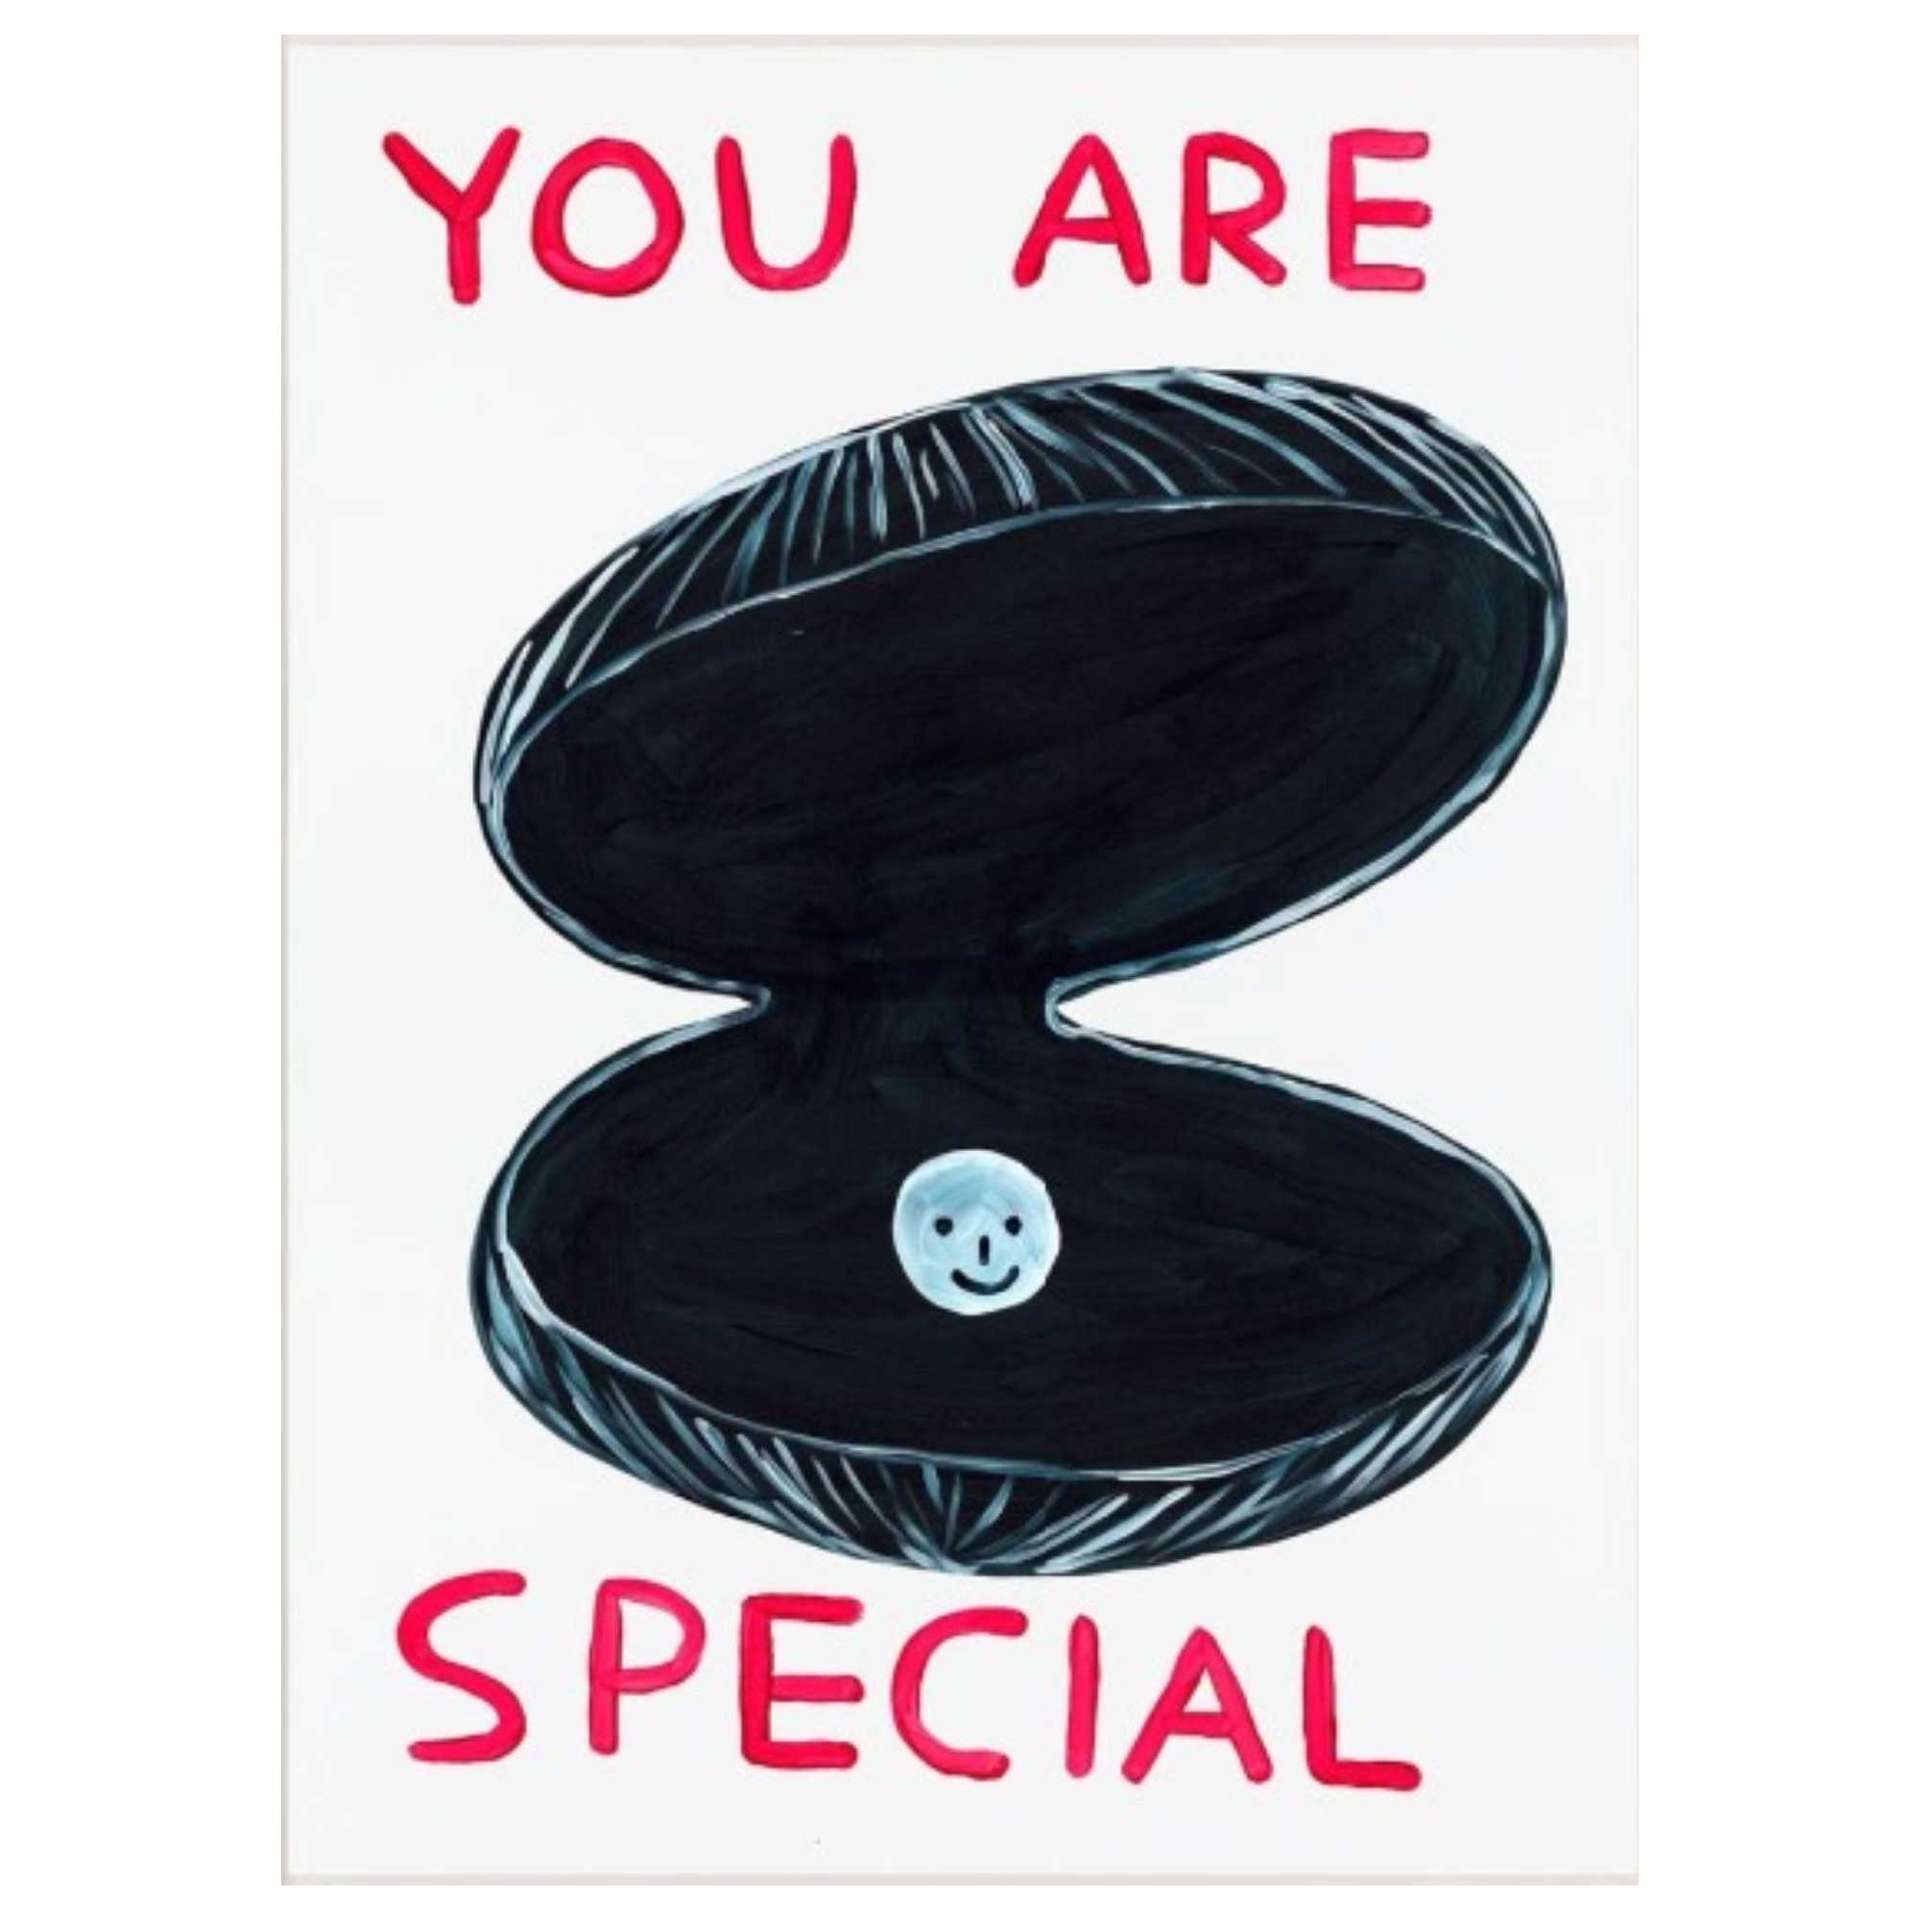 A Guide To Collecting David Shrigley Prints |